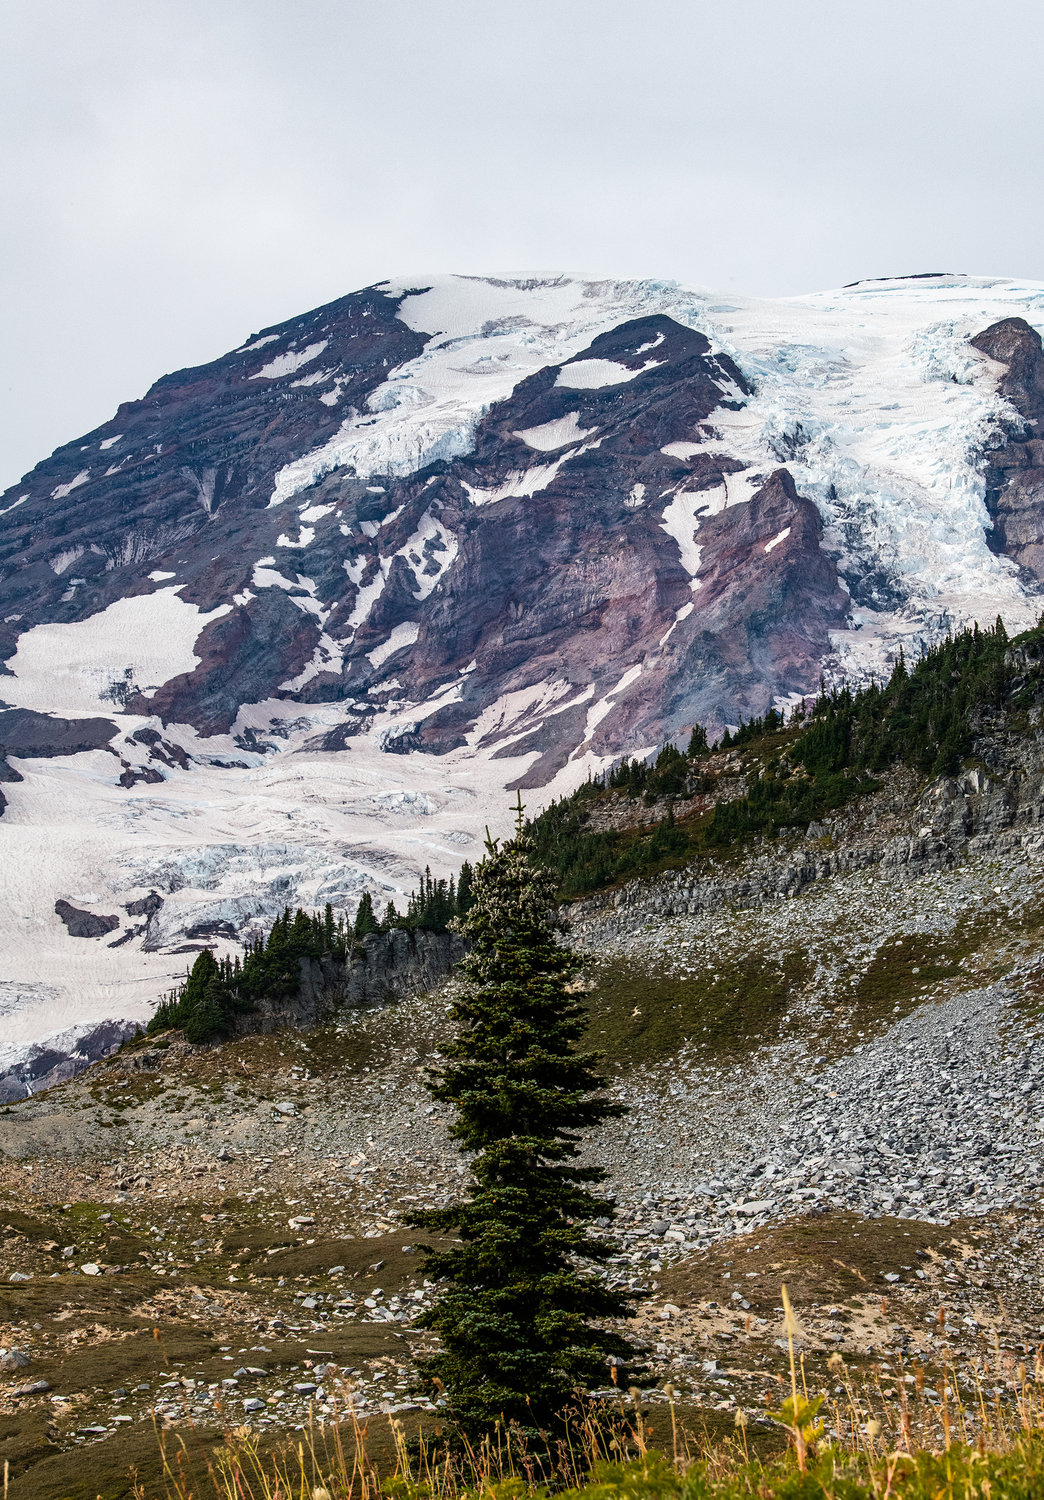 Mount Rainier towers behind rocks and meadows at Paradise on Wednesday.